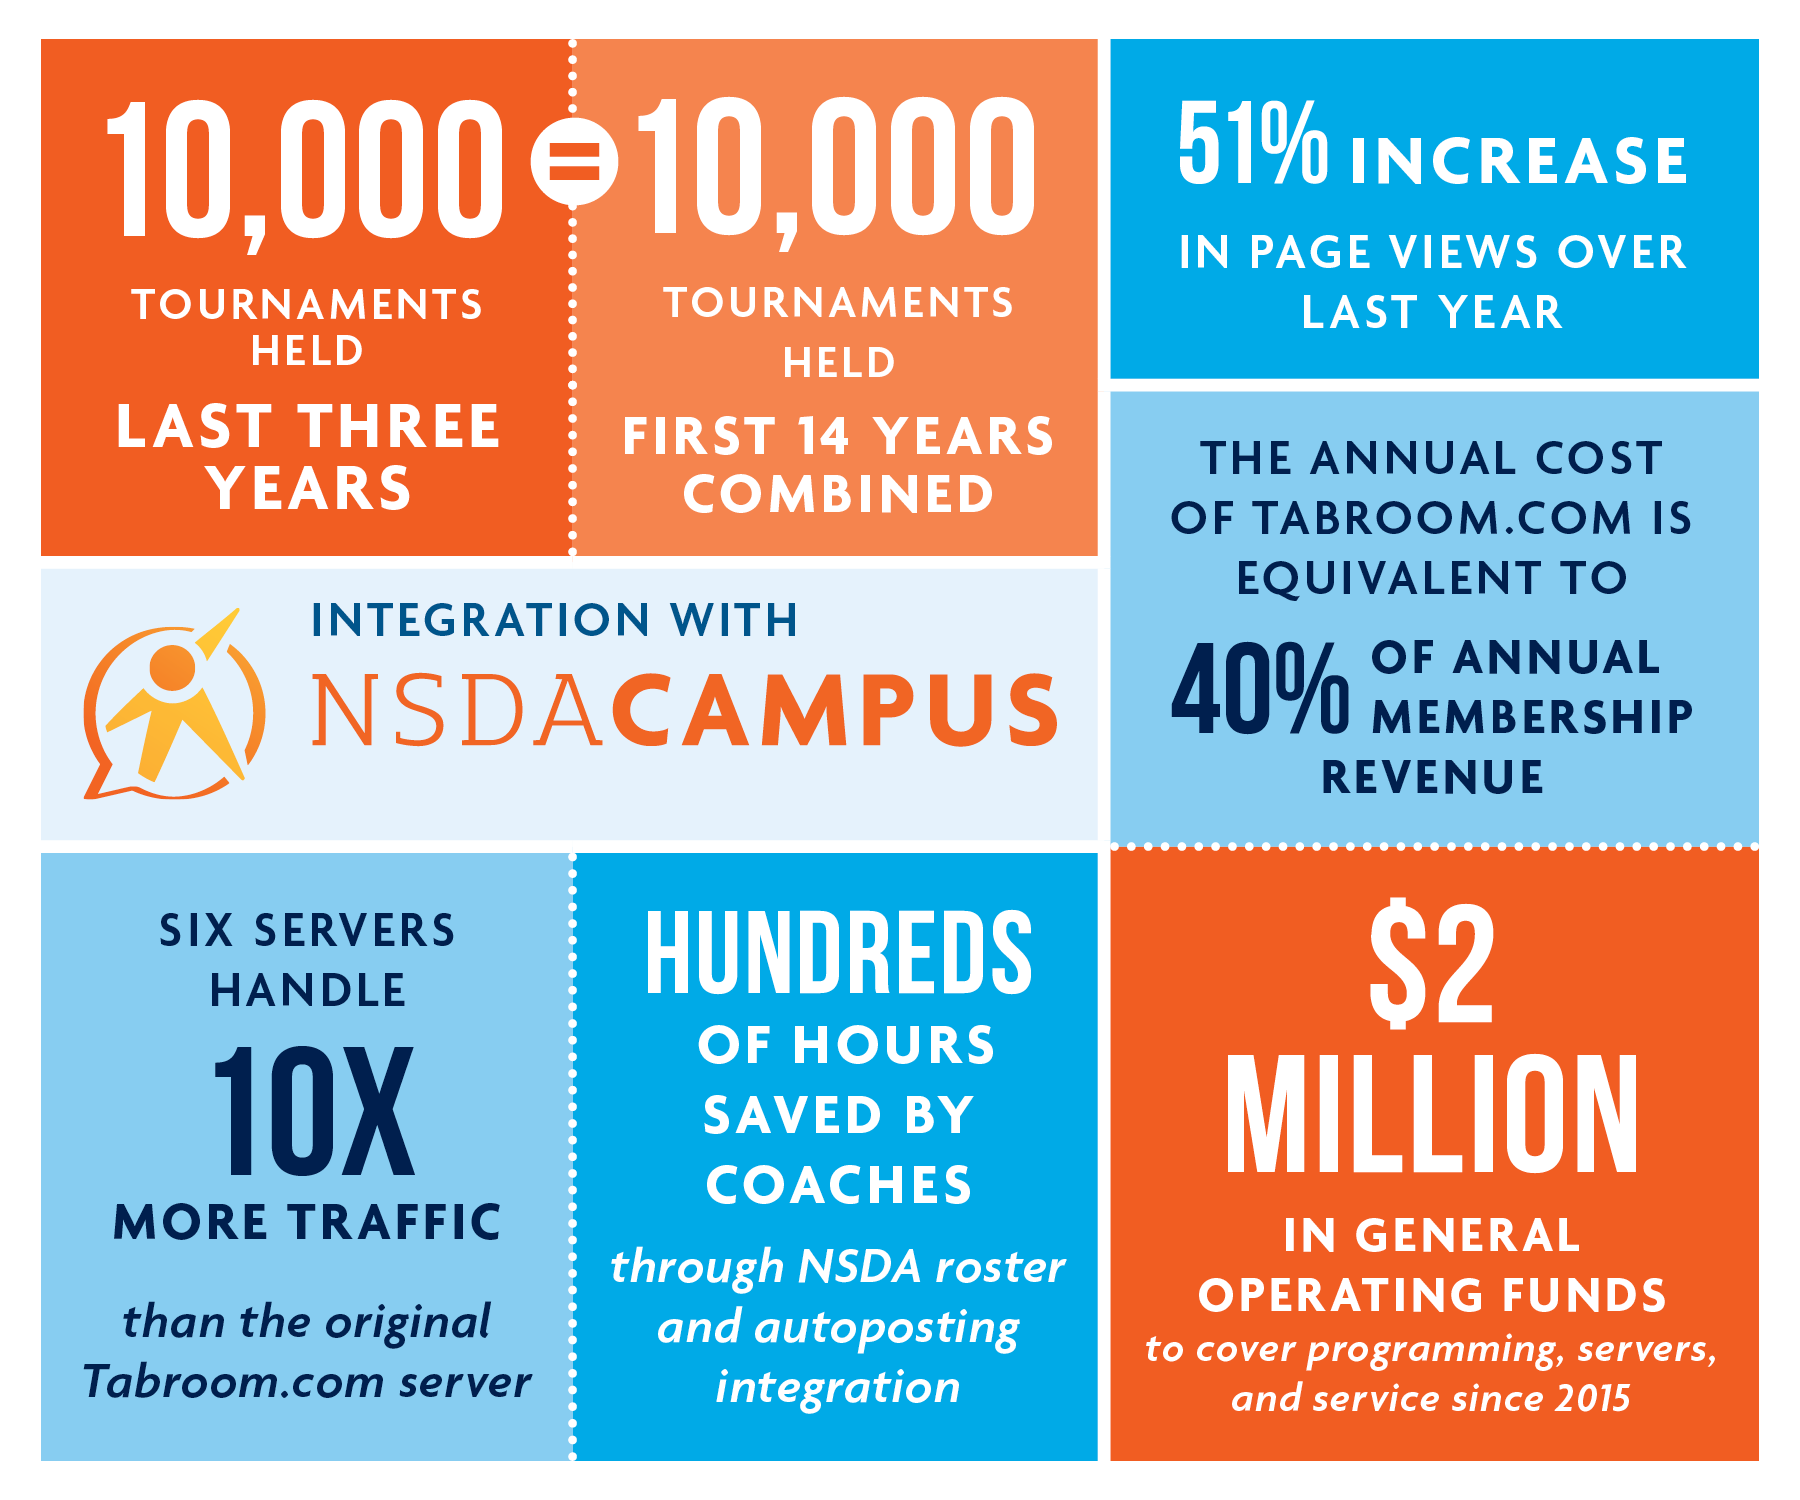 10,000 tournaments held, last three years = first 14 years Combined. 51% increase in page views over last year. Integration with NSDA Campus. The annual cost of Tabroom is equivalent to 40% of annual membership revenue. Six servers handle 10 x more traffic than the original Tabroom.com server. Hundreds of hours saved by coaches through NSDA roster and autoposting integration. $2 million in general operating funds to cover programming, servers, and service since 2015